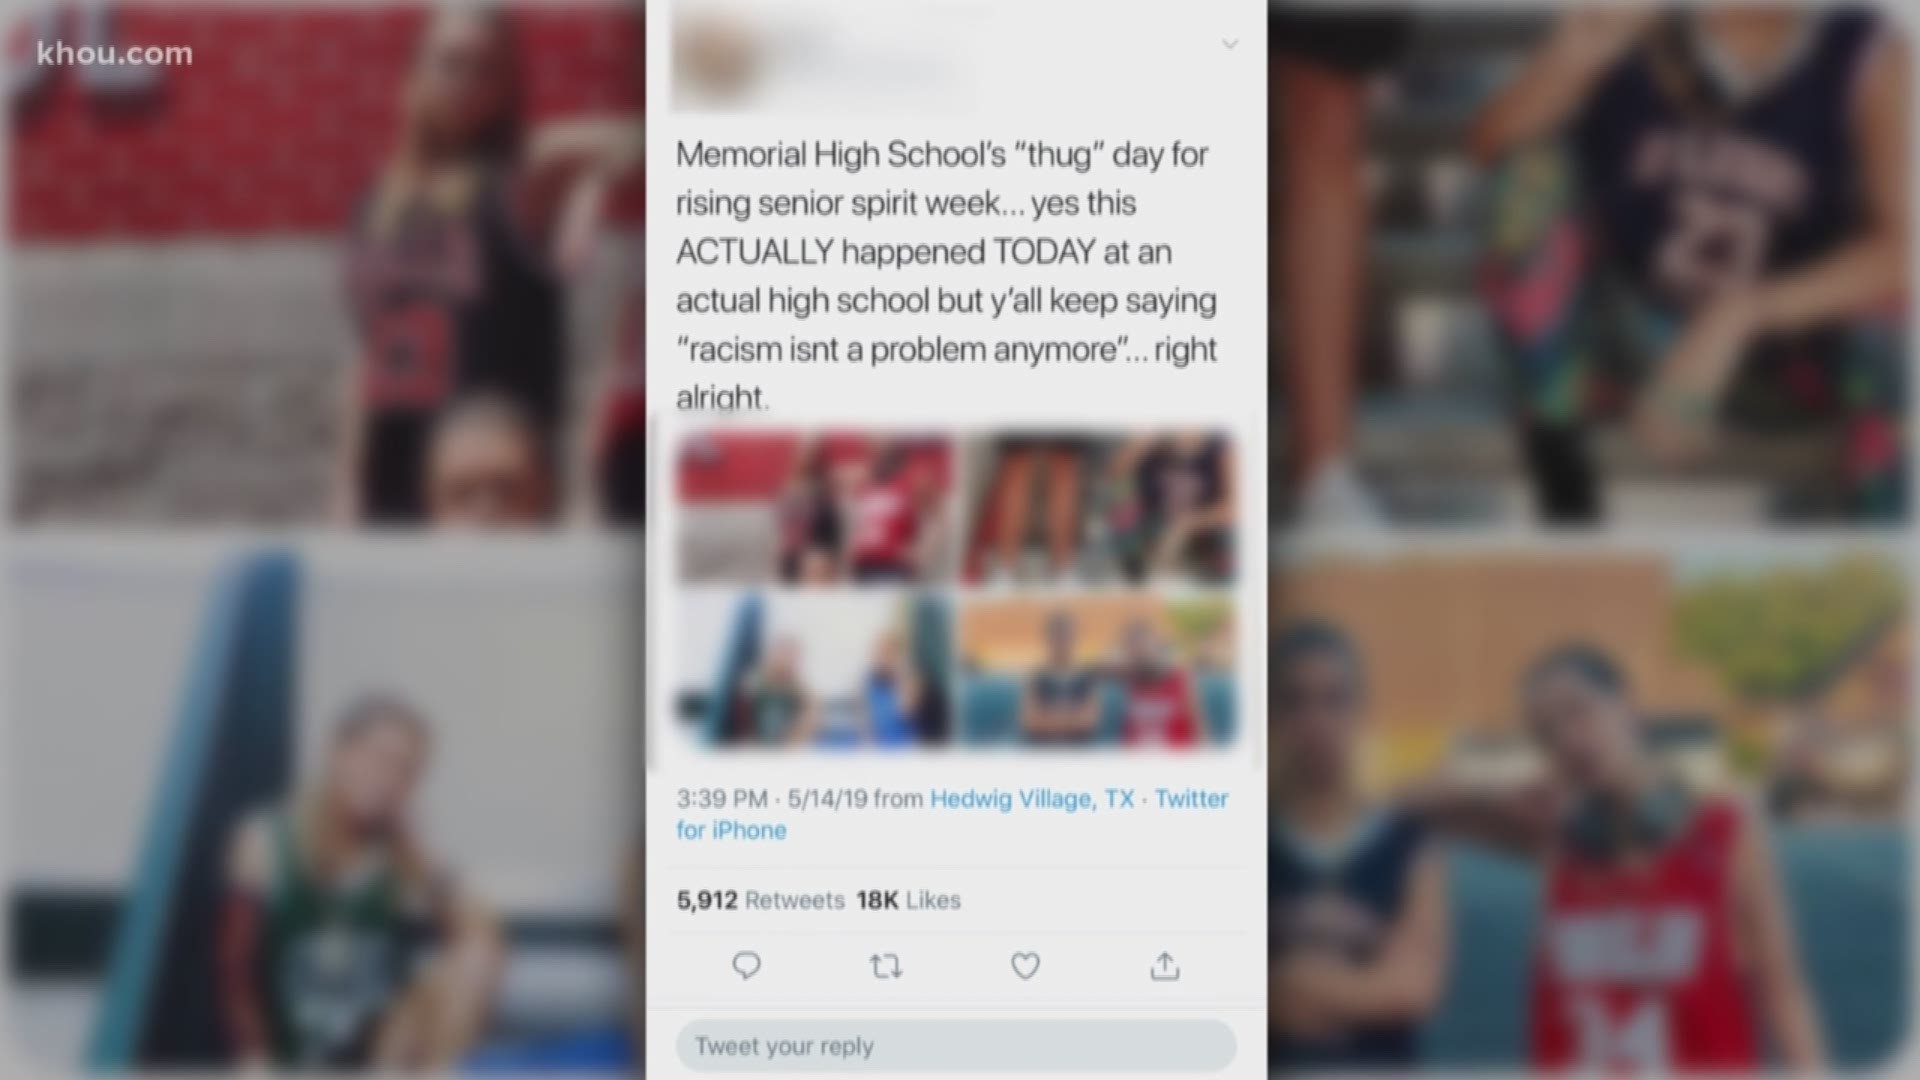 Some Memorial High School students are being called out for pictures online that some people find offensive. The pictures showed students dressed for "spirit week" on what they called "Thug Day."